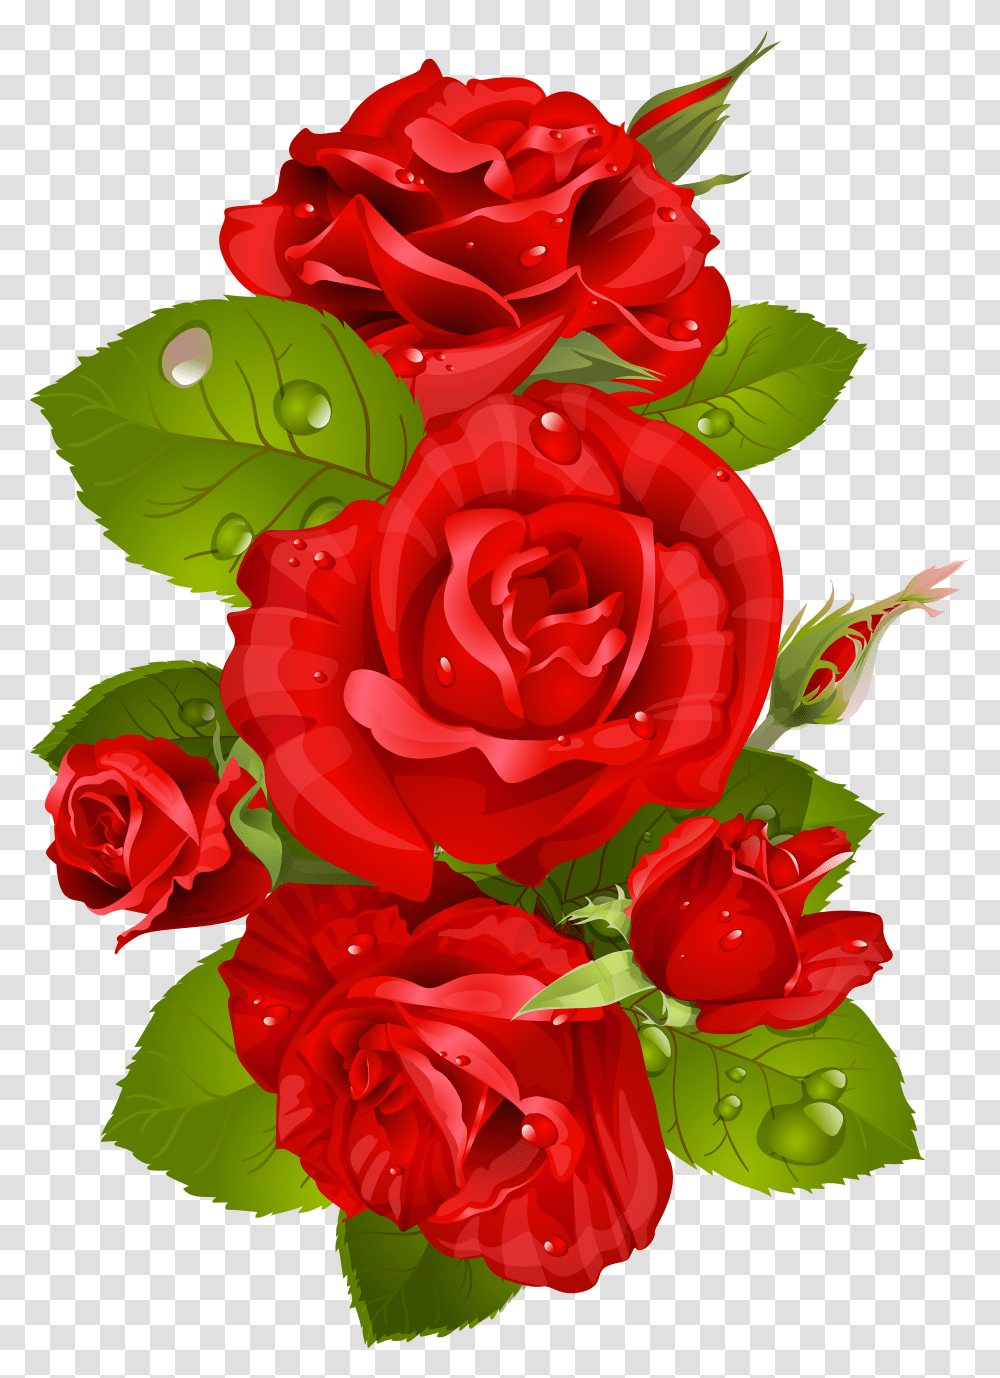 Rose Cliparts Decoration Watercolour Red Flower Transparent Png